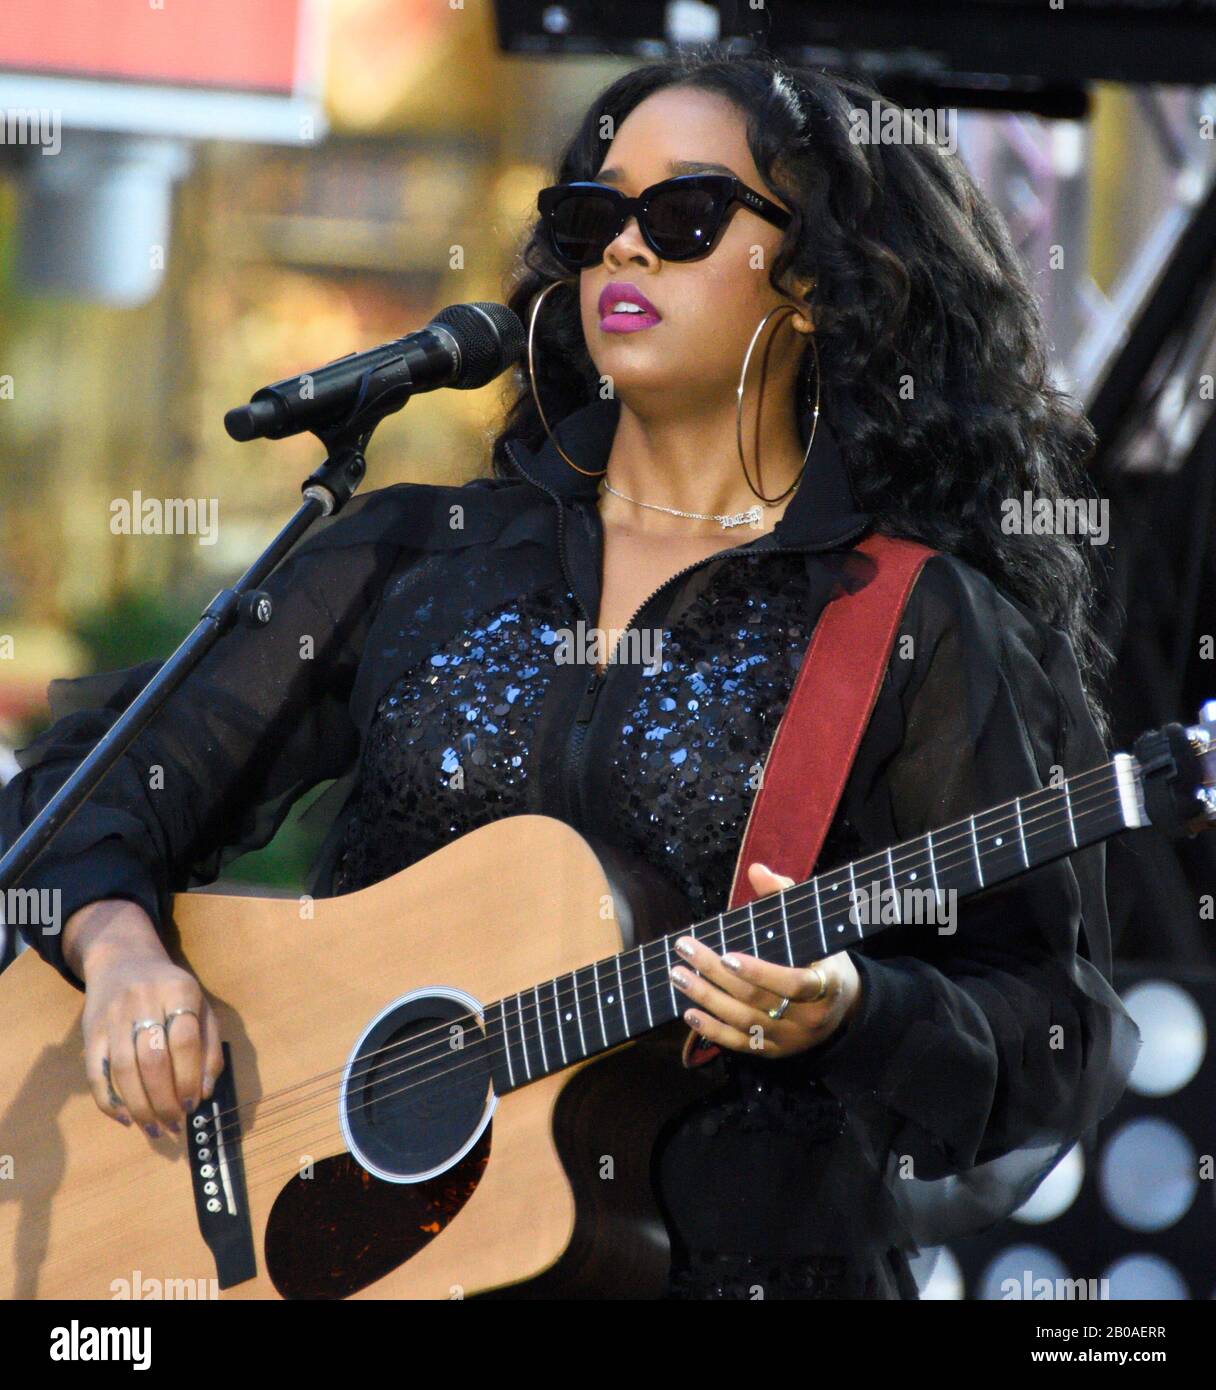 NEW YORK, NY, USA - AUGUST 30, 2019: American Singer-Songwriter H.E.R. Performs on NBC's 'Today' Show Summer Concert Series at Rockefeller Plaza. Stock Photo